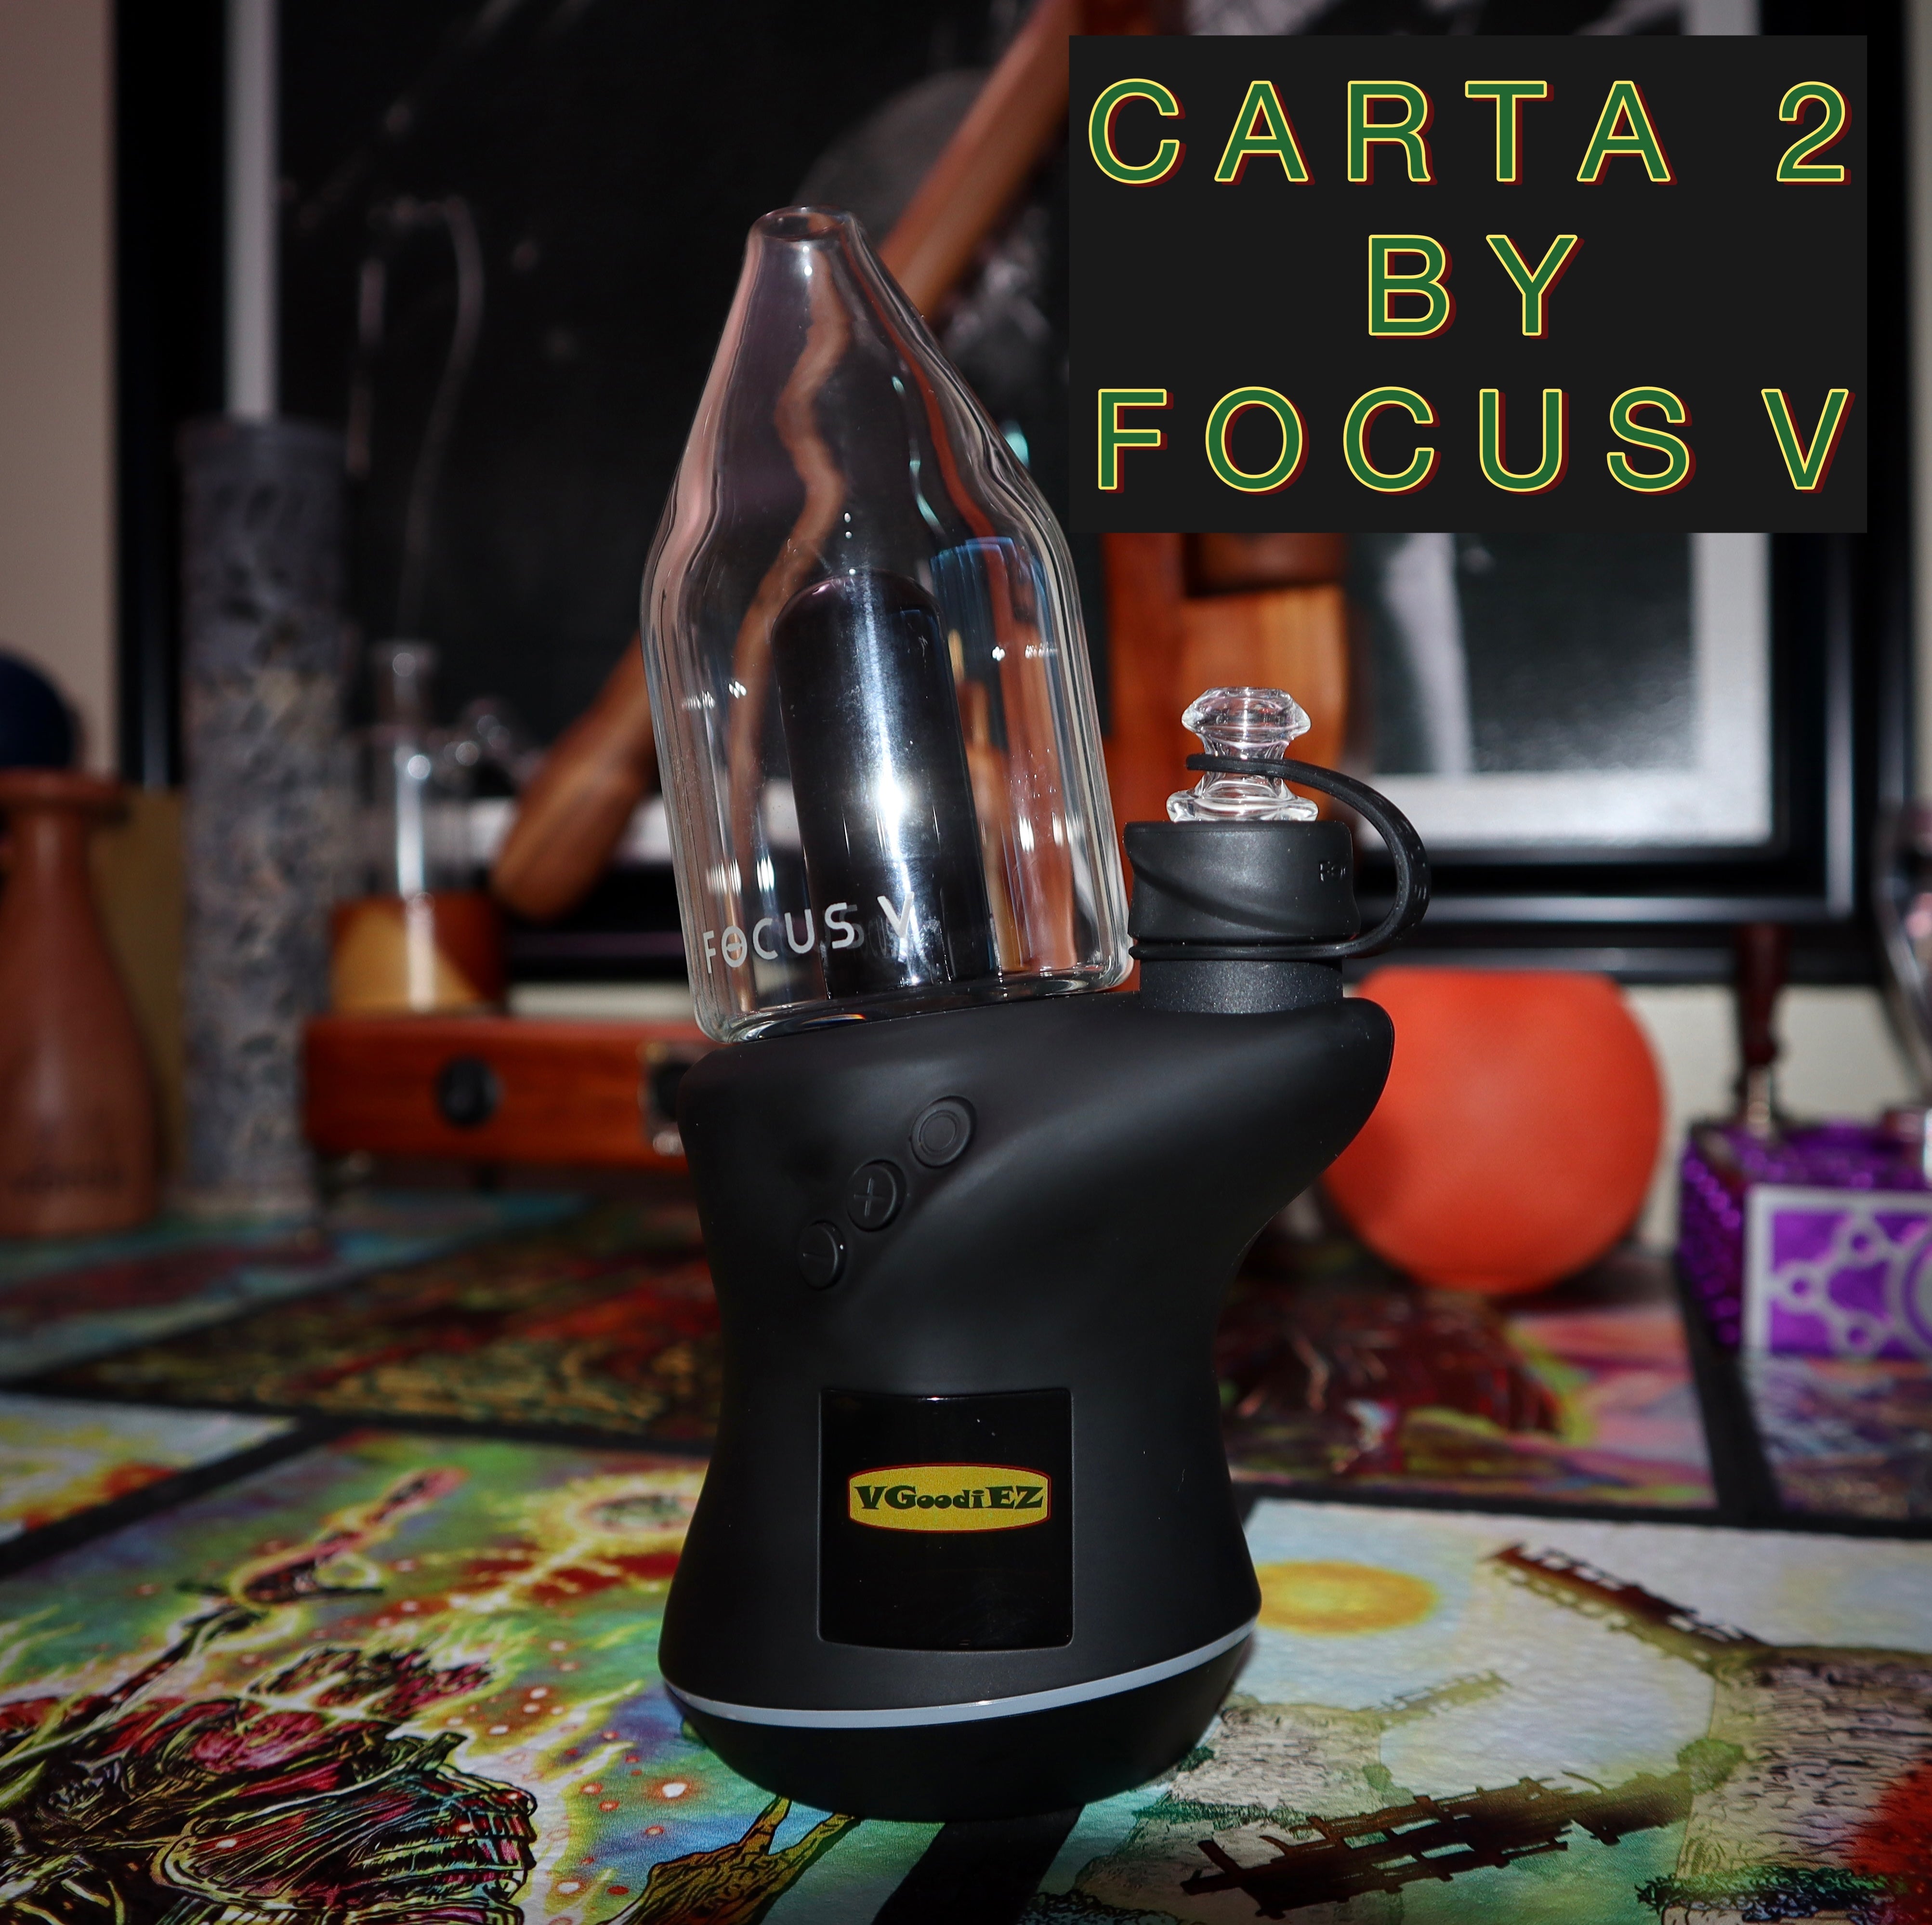 The CARTA 2 by Focus V